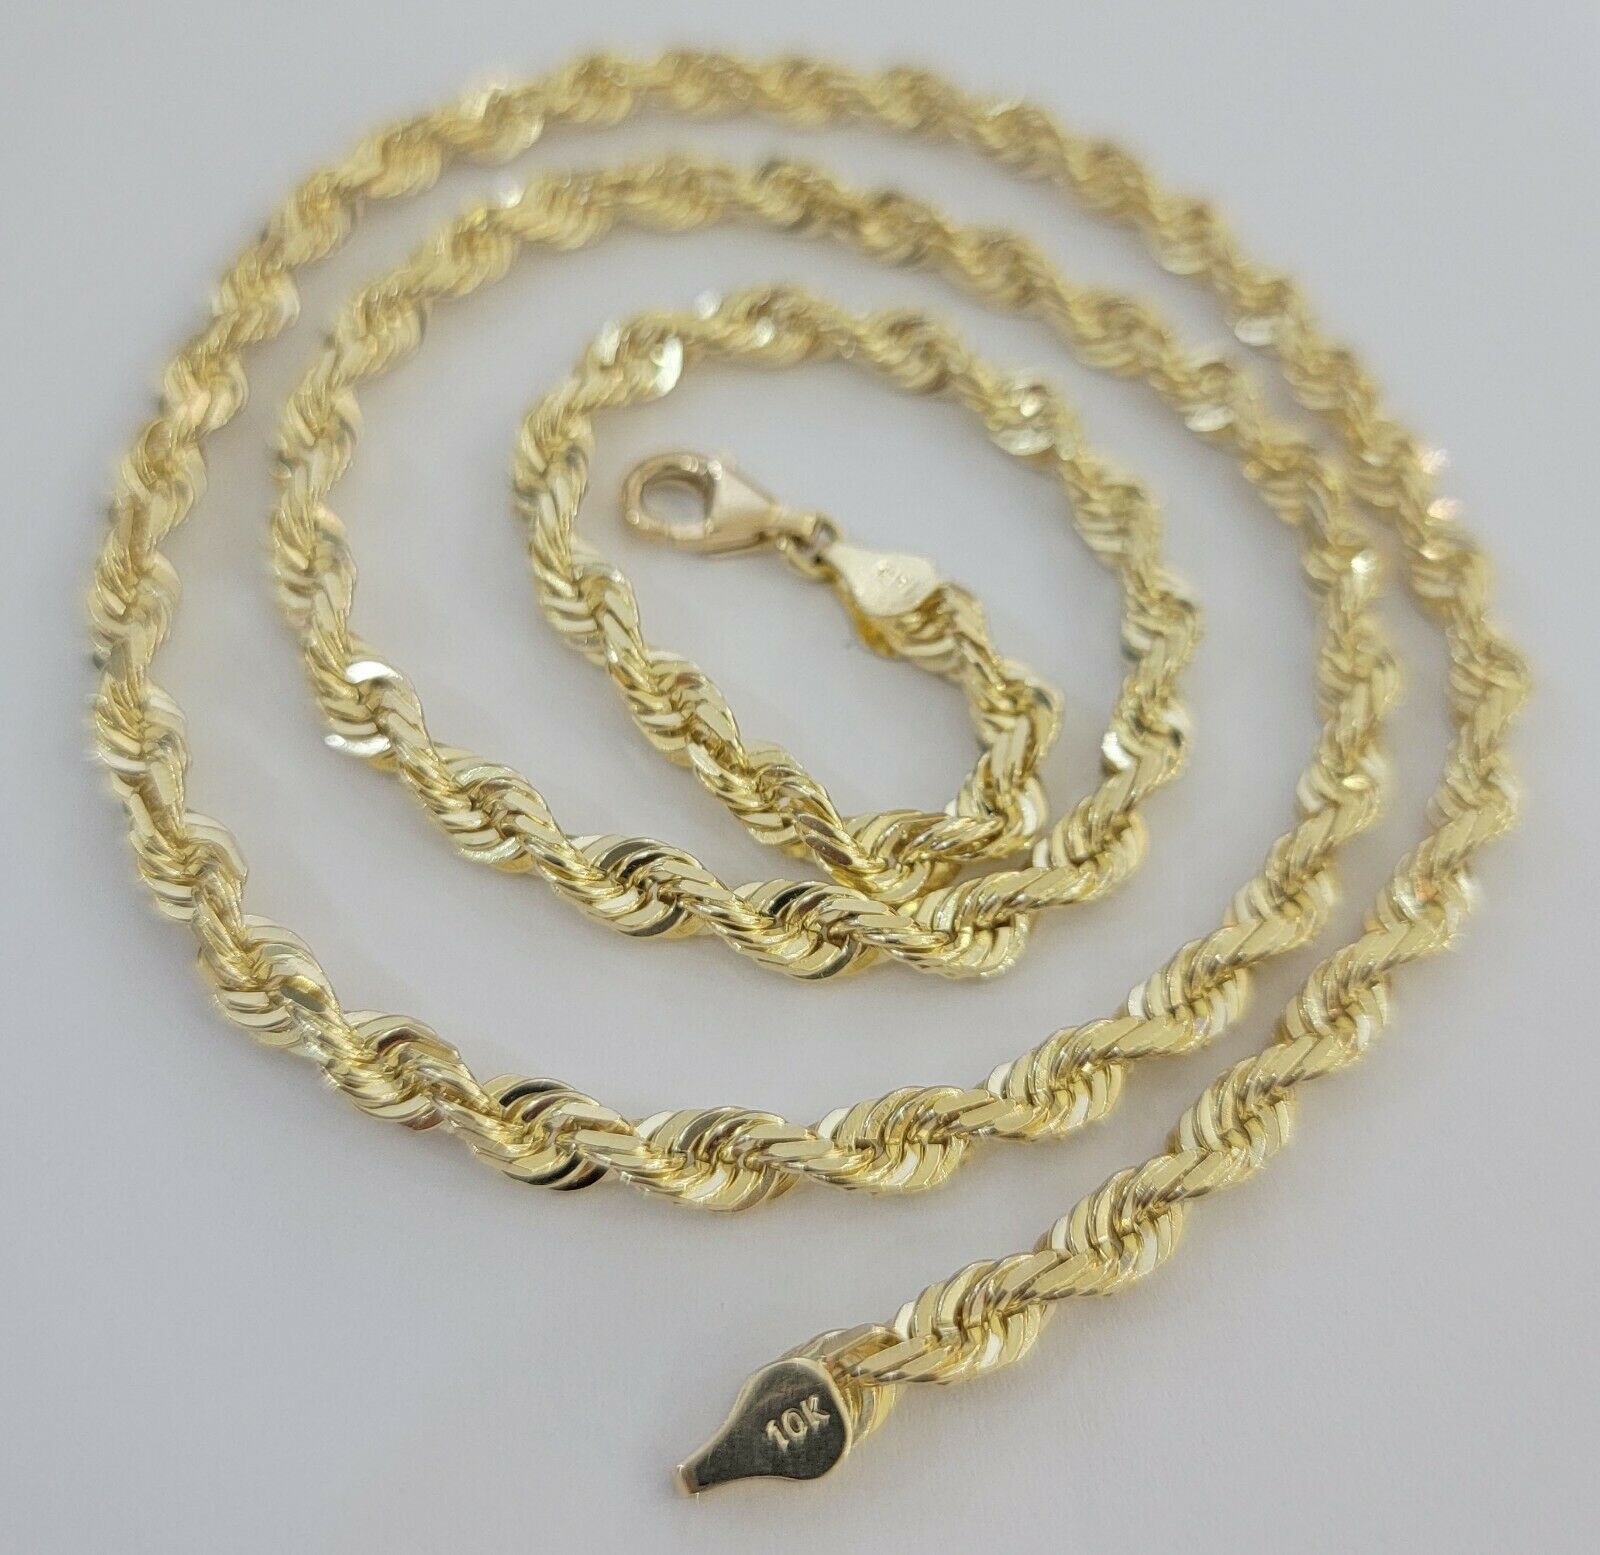 SOLID Gold 10k Rope Chain 5mm 22"-26" Inch 10kt Yellow Gold Necklace Diamond Cut